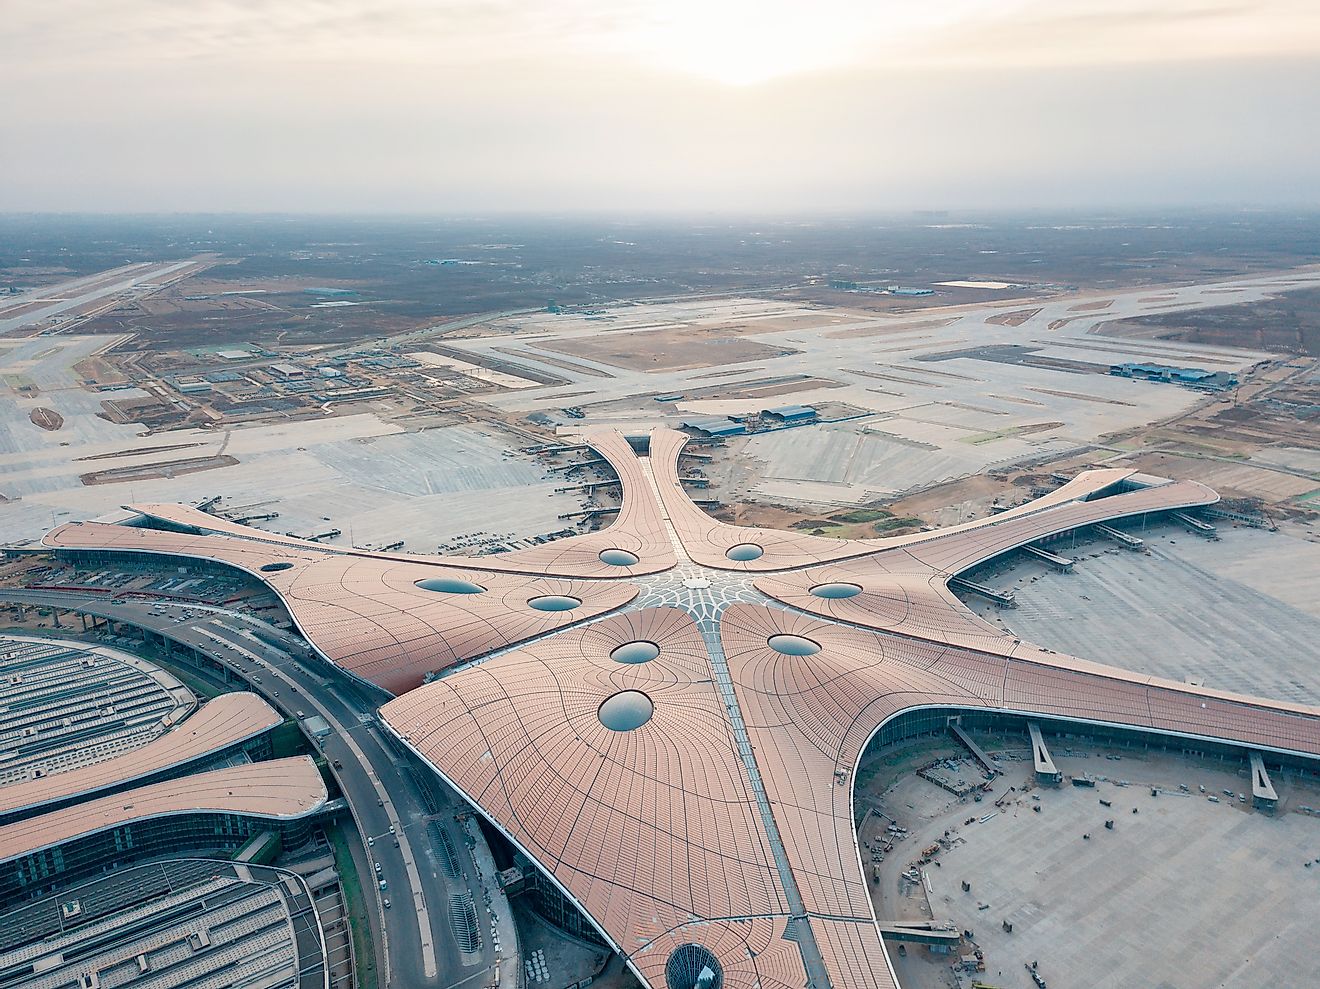 China's Beijing Daxing International Airport is the newest airport to make it to the list of the world's 10 biggest airports. Editorial credit: lazy dragon / Shutterstock.com